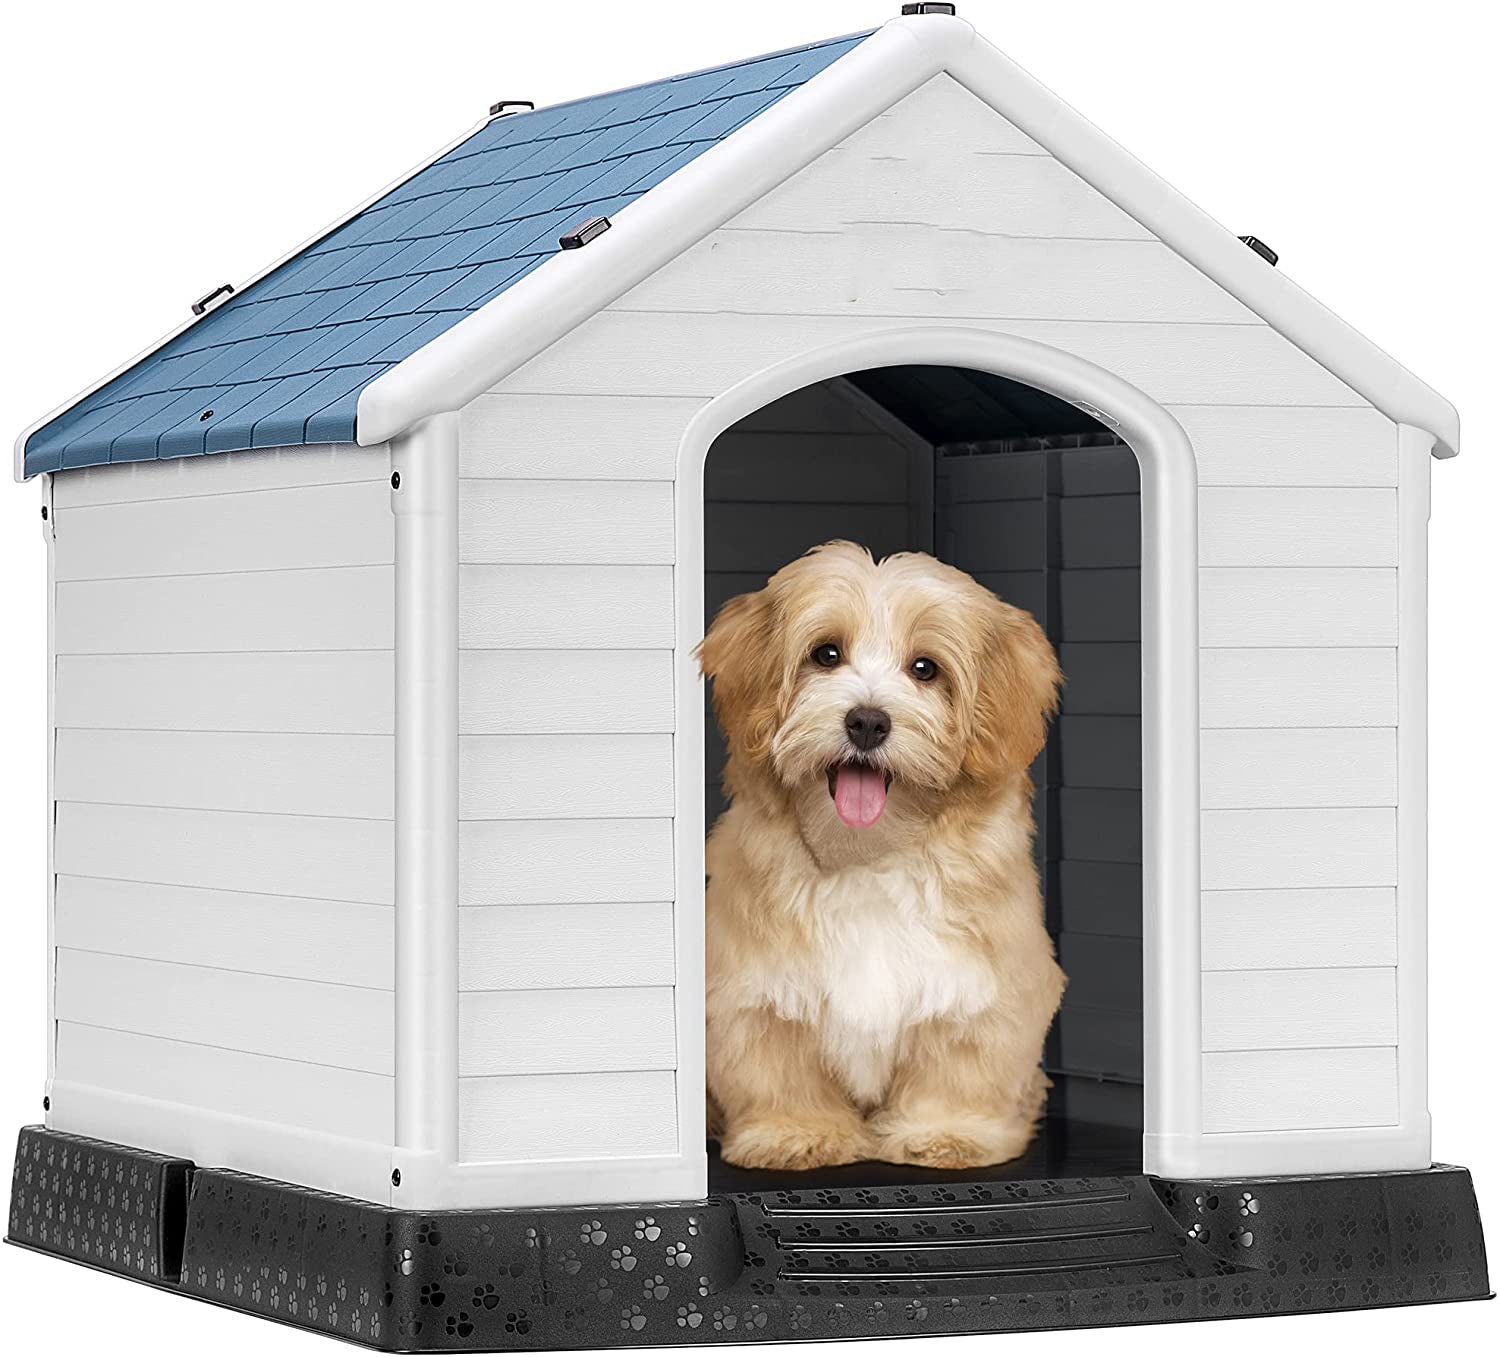 EXTFIT Durable Waterproof Plastic Pet Dog House Indoor Outdoor Puppy Shelter Kennel with Air Vents and Elevated Floor Animals & Pet Supplies > Pet Supplies > Dog Supplies > Dog Houses EXTFIT Medium - 28" Height  